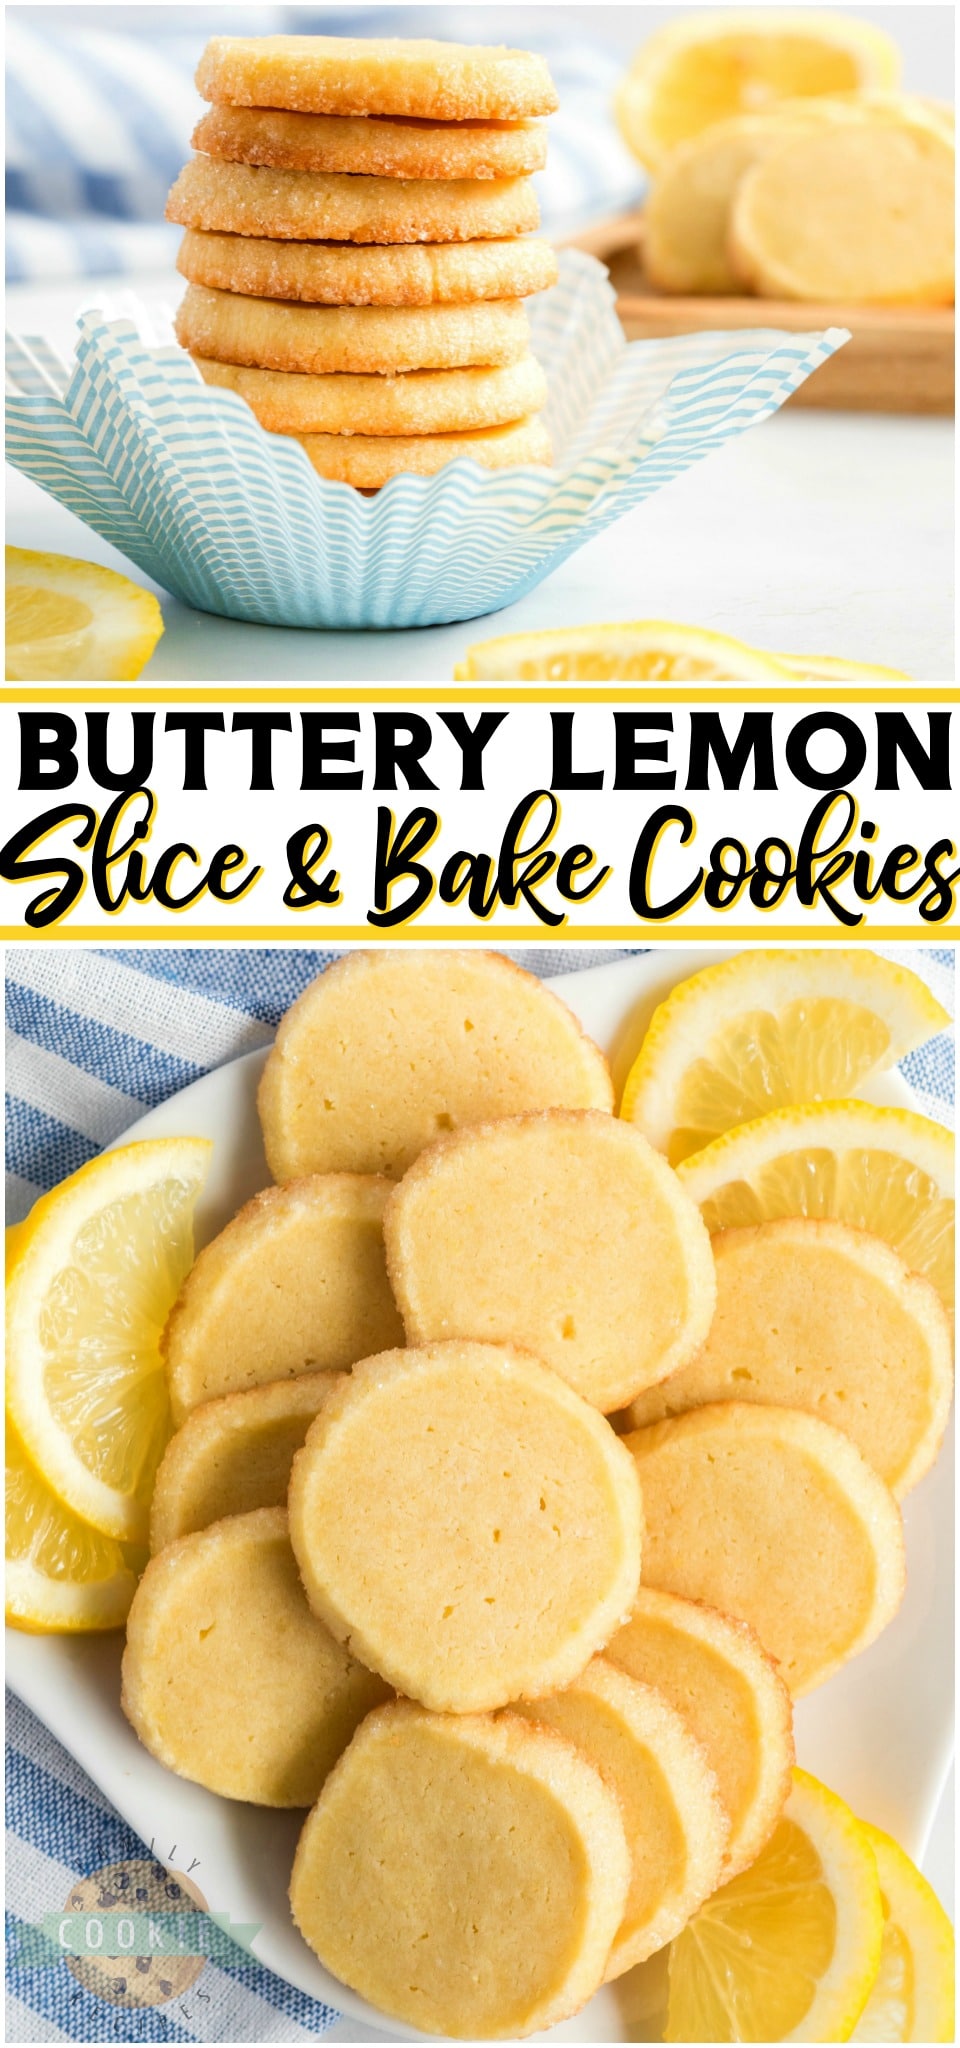 Lemon slice and bake cookies are a simply, buttery cookie recipe with lovely lemon flavor. Easy to make ahead, these lemon shortbread cookies are perfect for parties & as gifts!  #lemon #cookies #butter #shortbread #sliceandbake #baking #dessert from FAMILY COOKIE RECIPES via @buttergirls